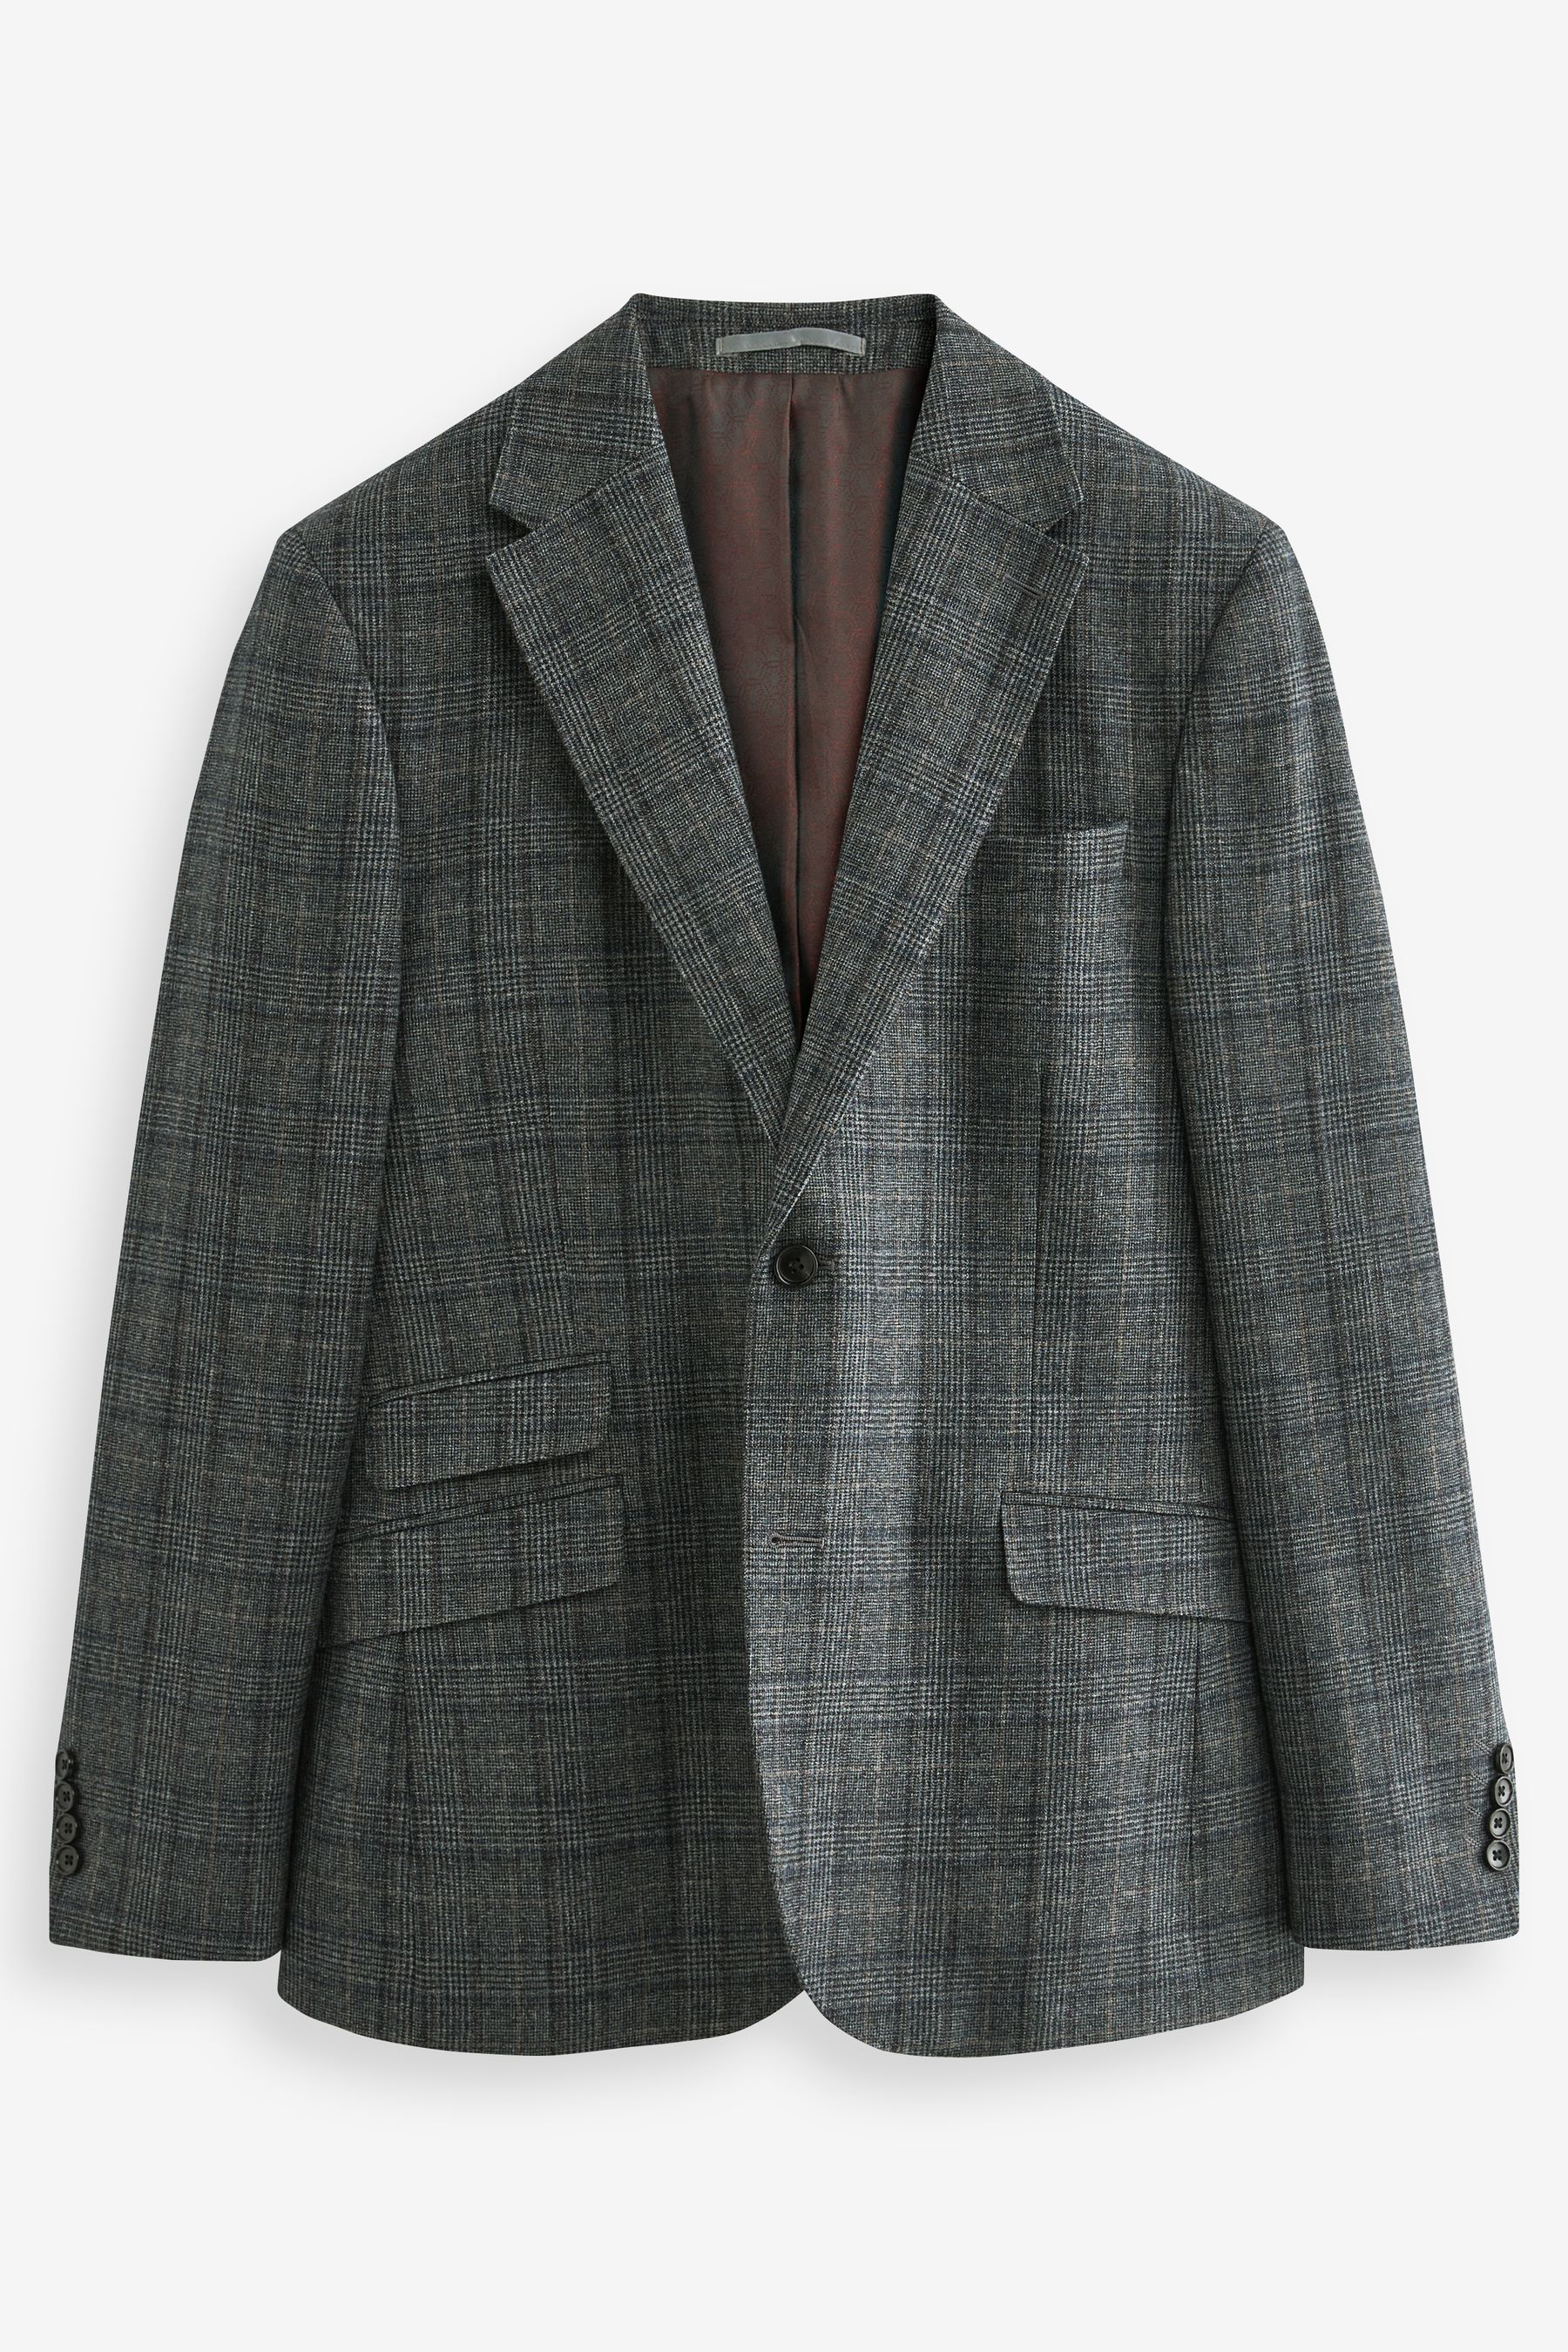 Buy Grey Slim Fit Signature Check Suit: Jacket from the Next UK online shop